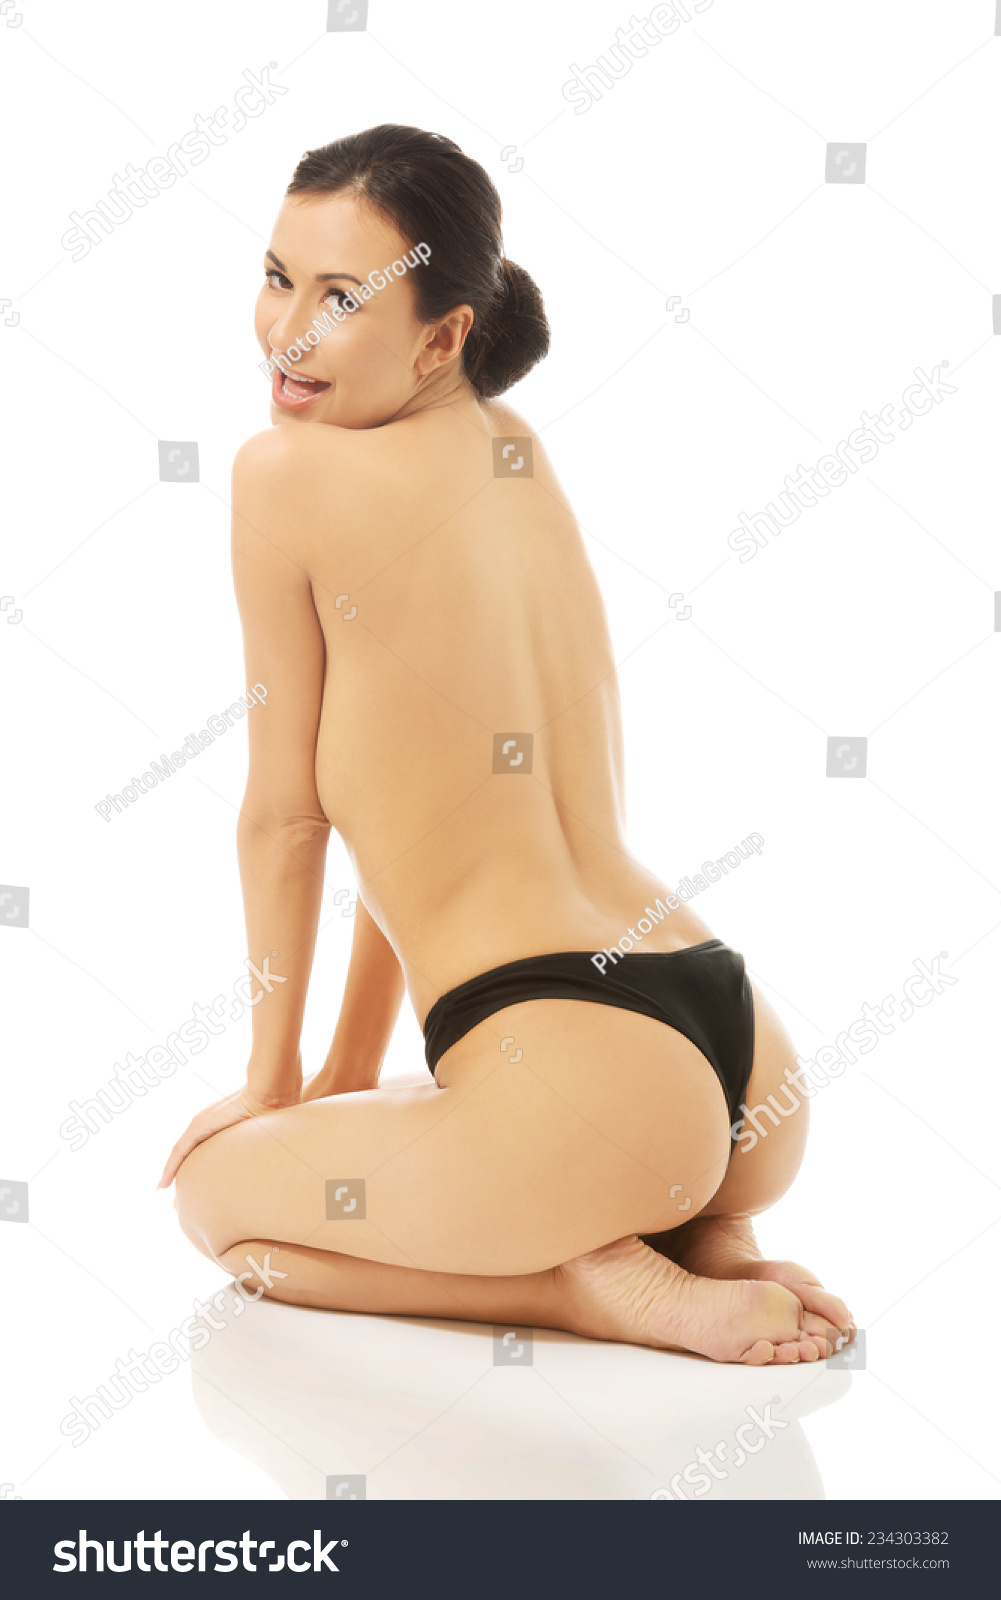 Naked Woman Knees On Pillow 47